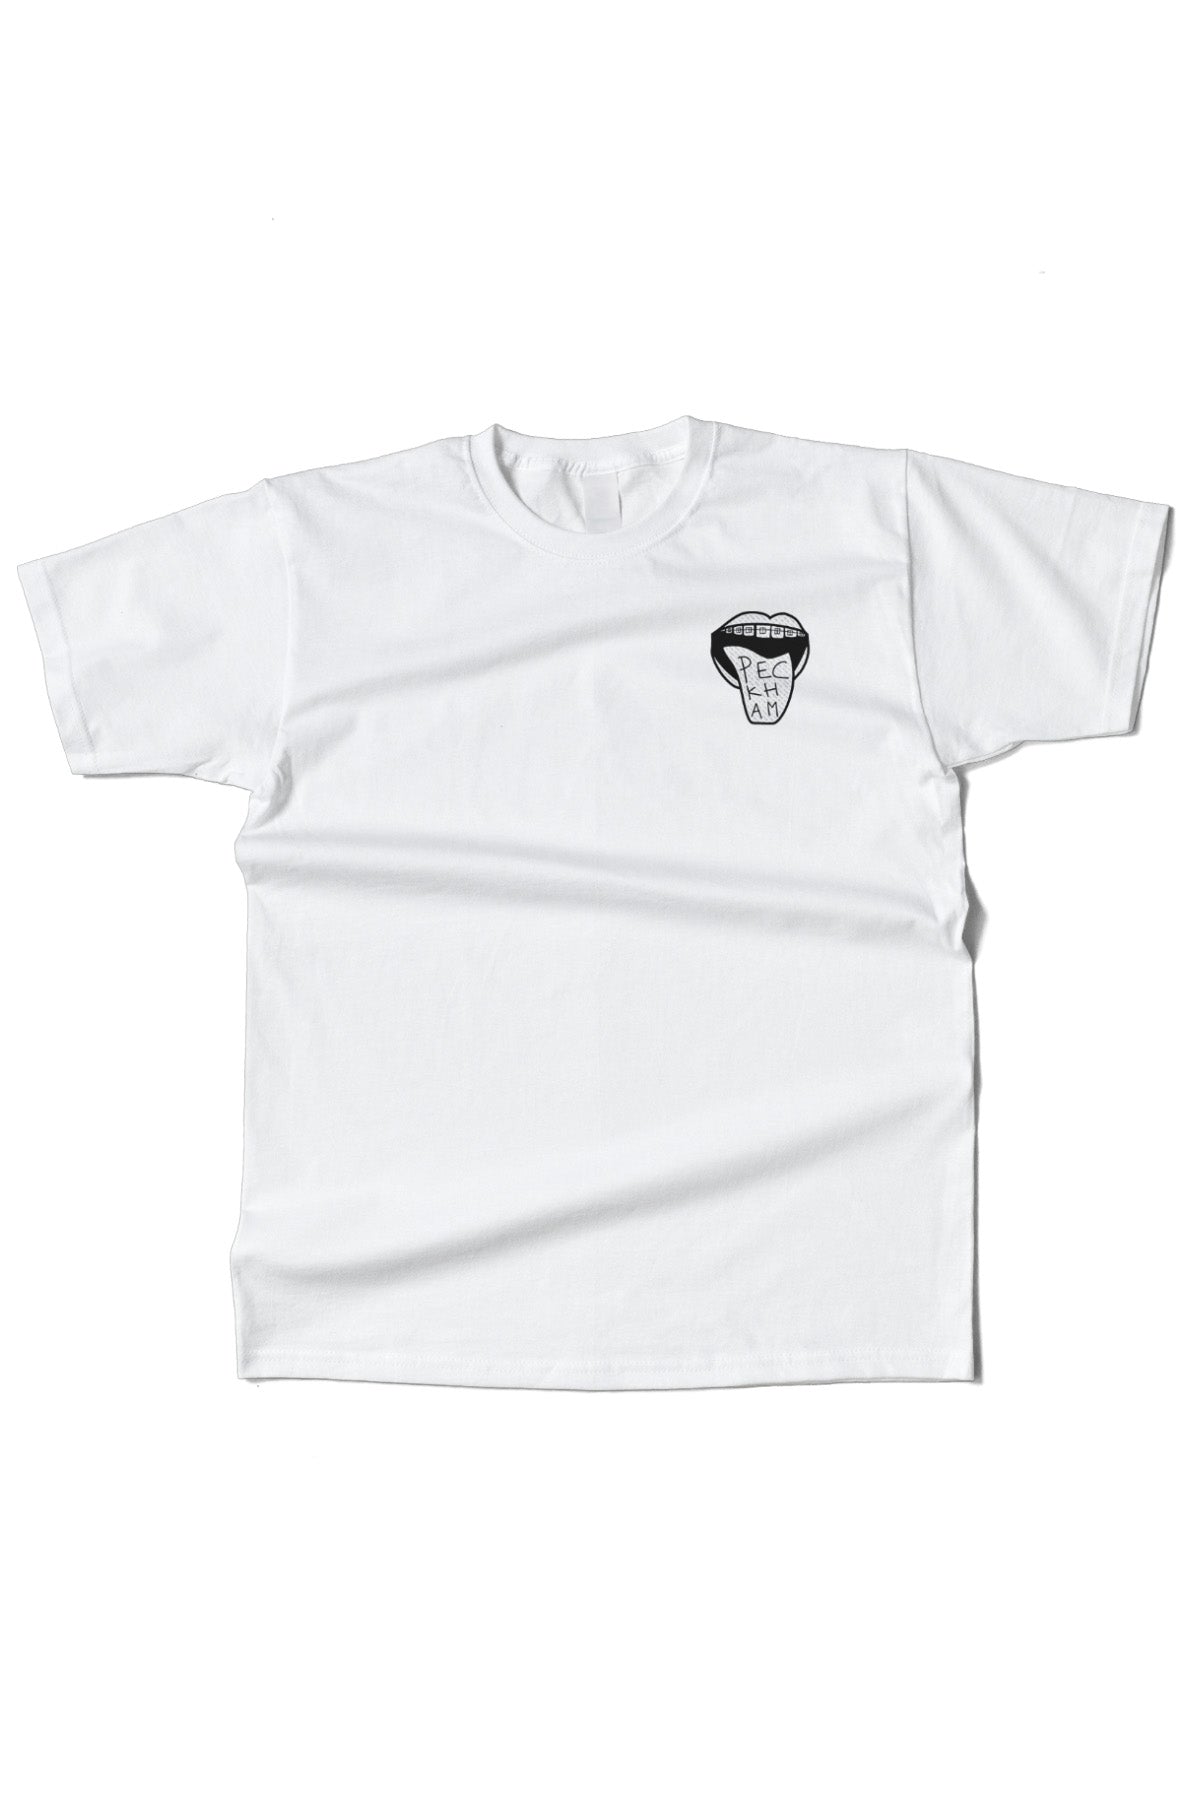 Peckham Mouth Loose Fit Unisex Tee - White